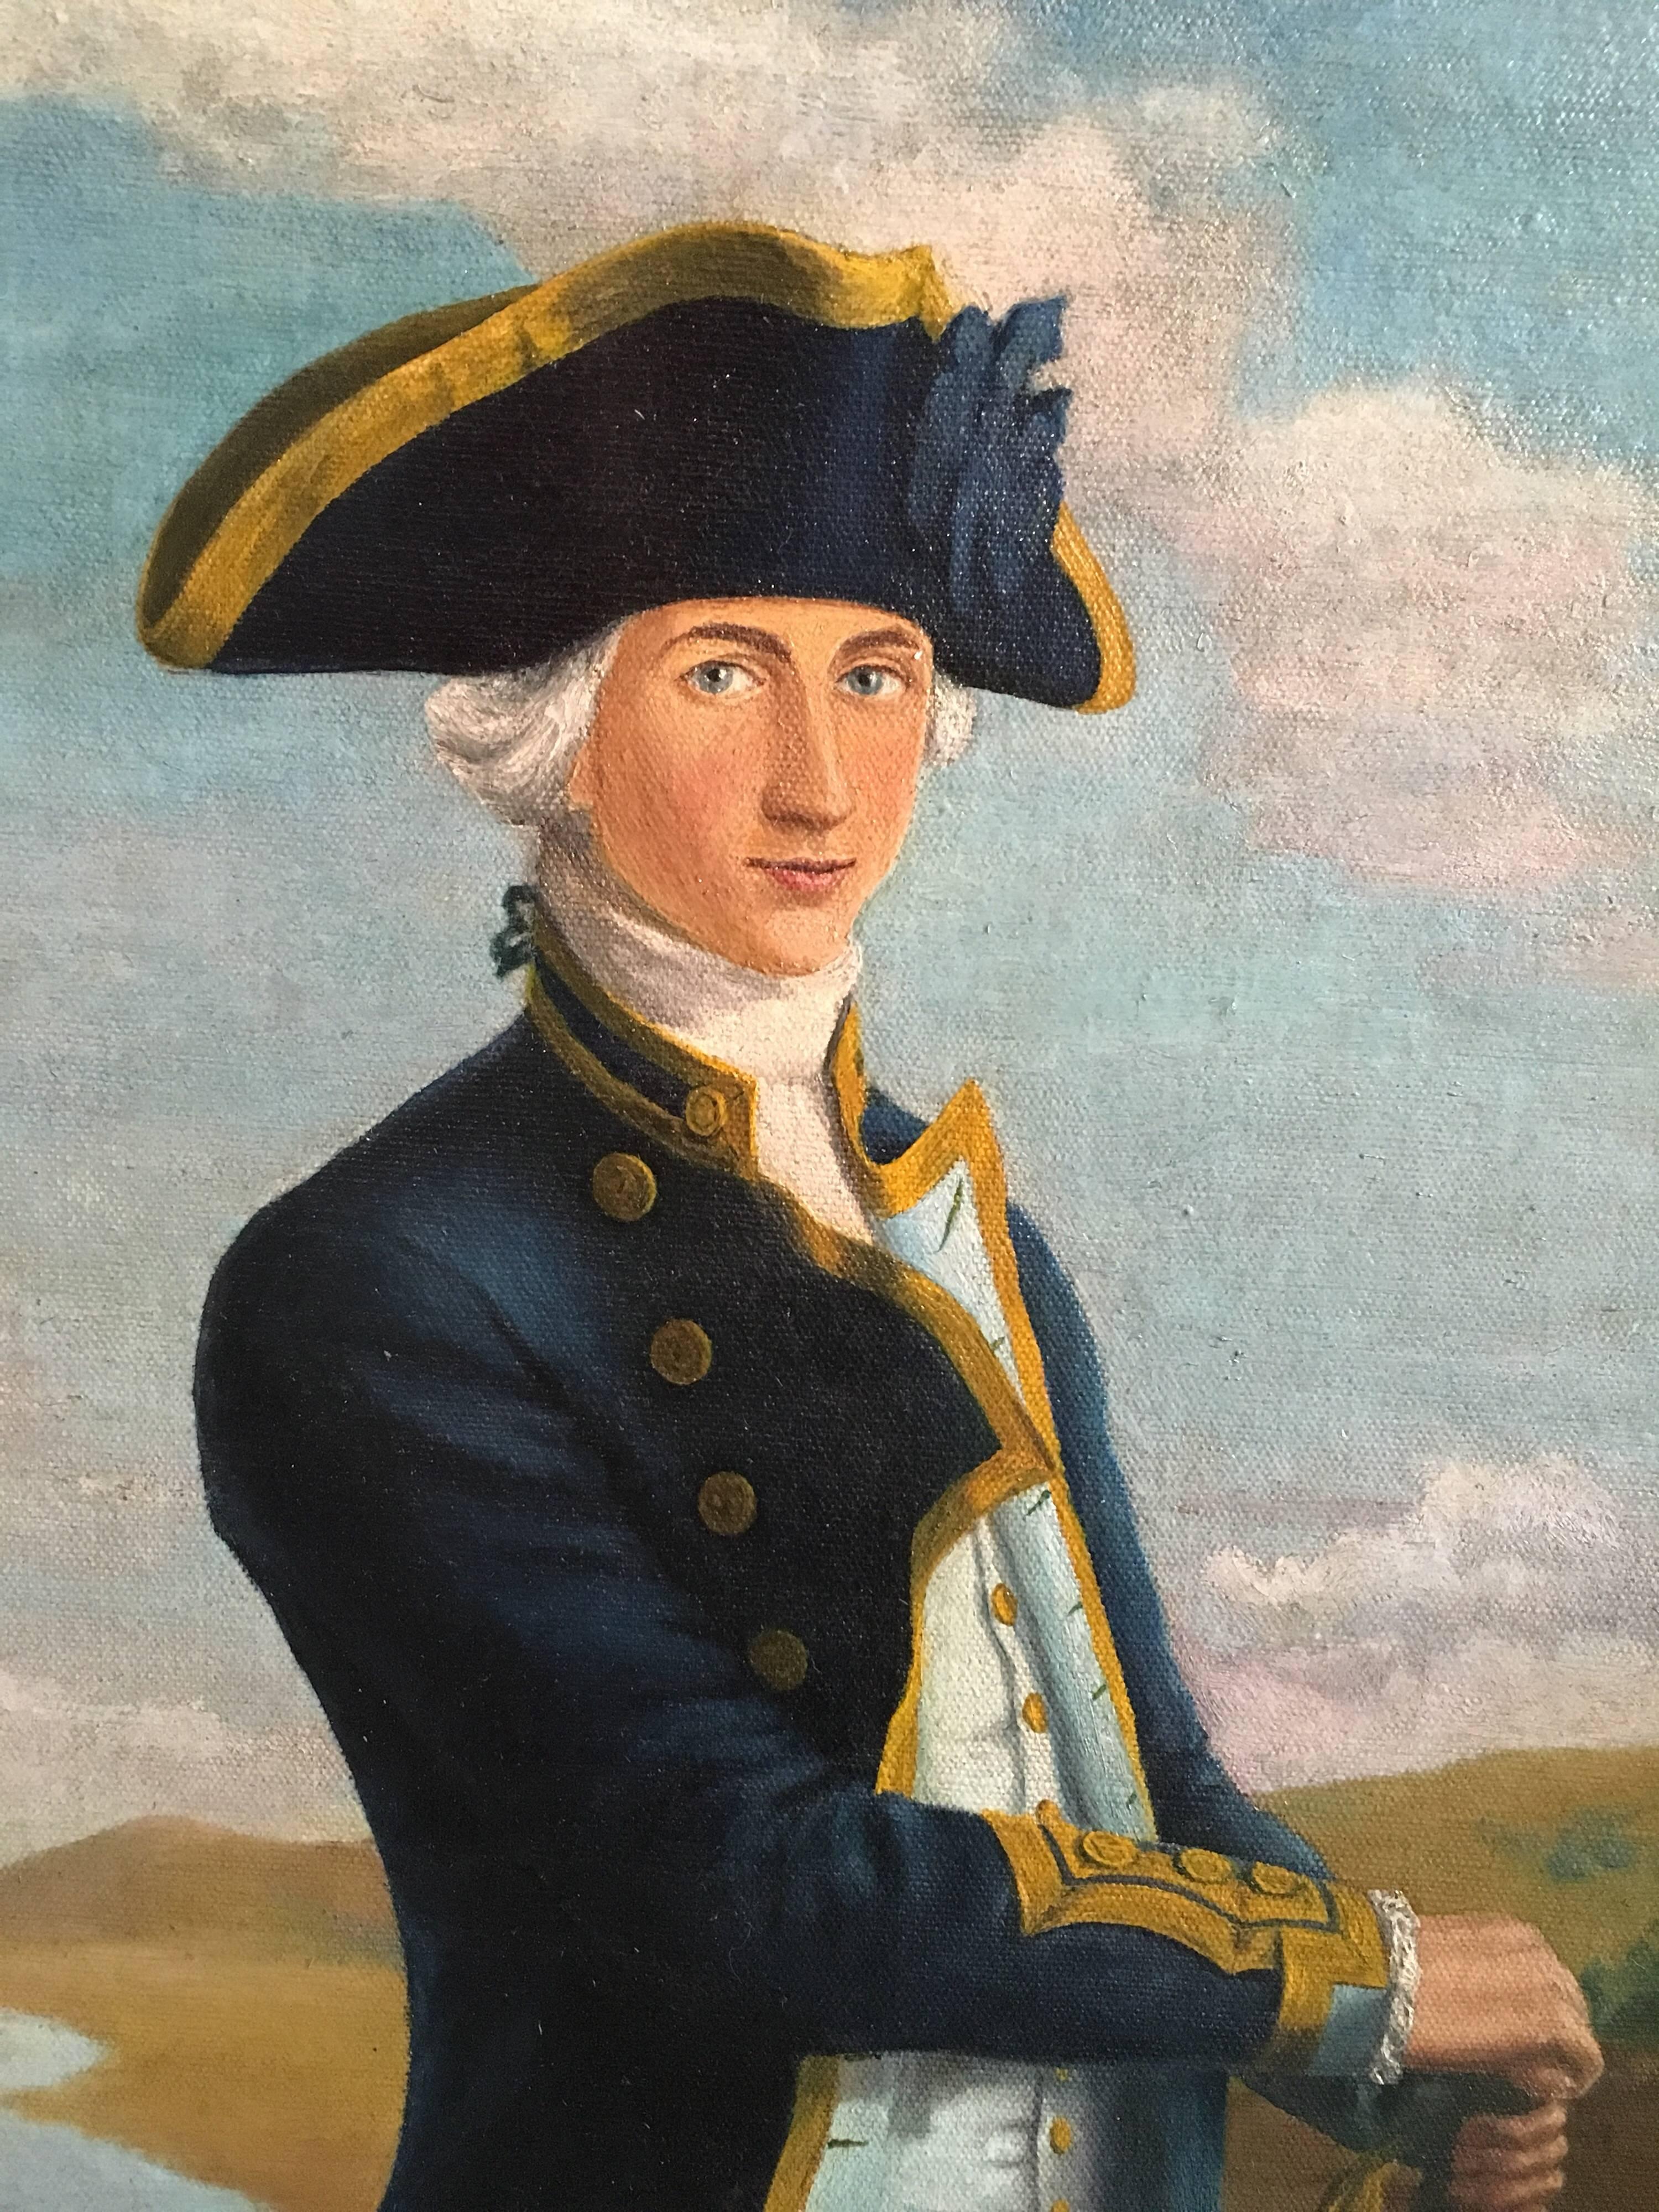 Admiral Lord Nelson, Fine Portrait, Oil Painting - Gray Figurative Painting by Unknown